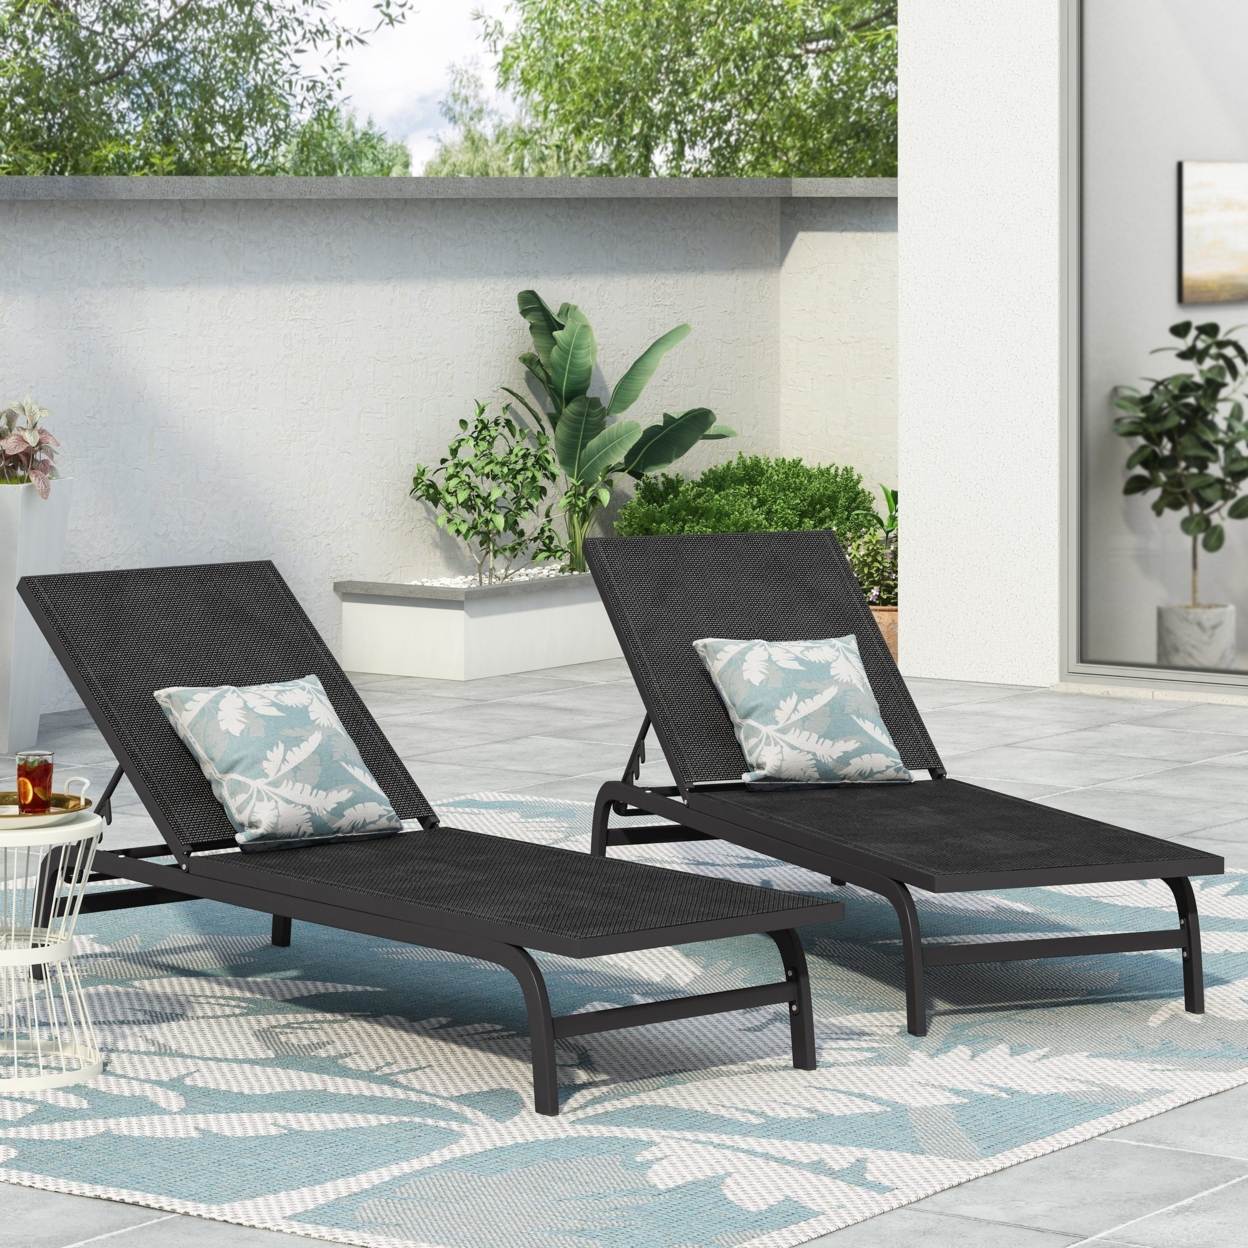 Stekar Outdoor Aluminum And Outdoor Mesh Chaise Lounge, Set Of 2 - Dark Gray